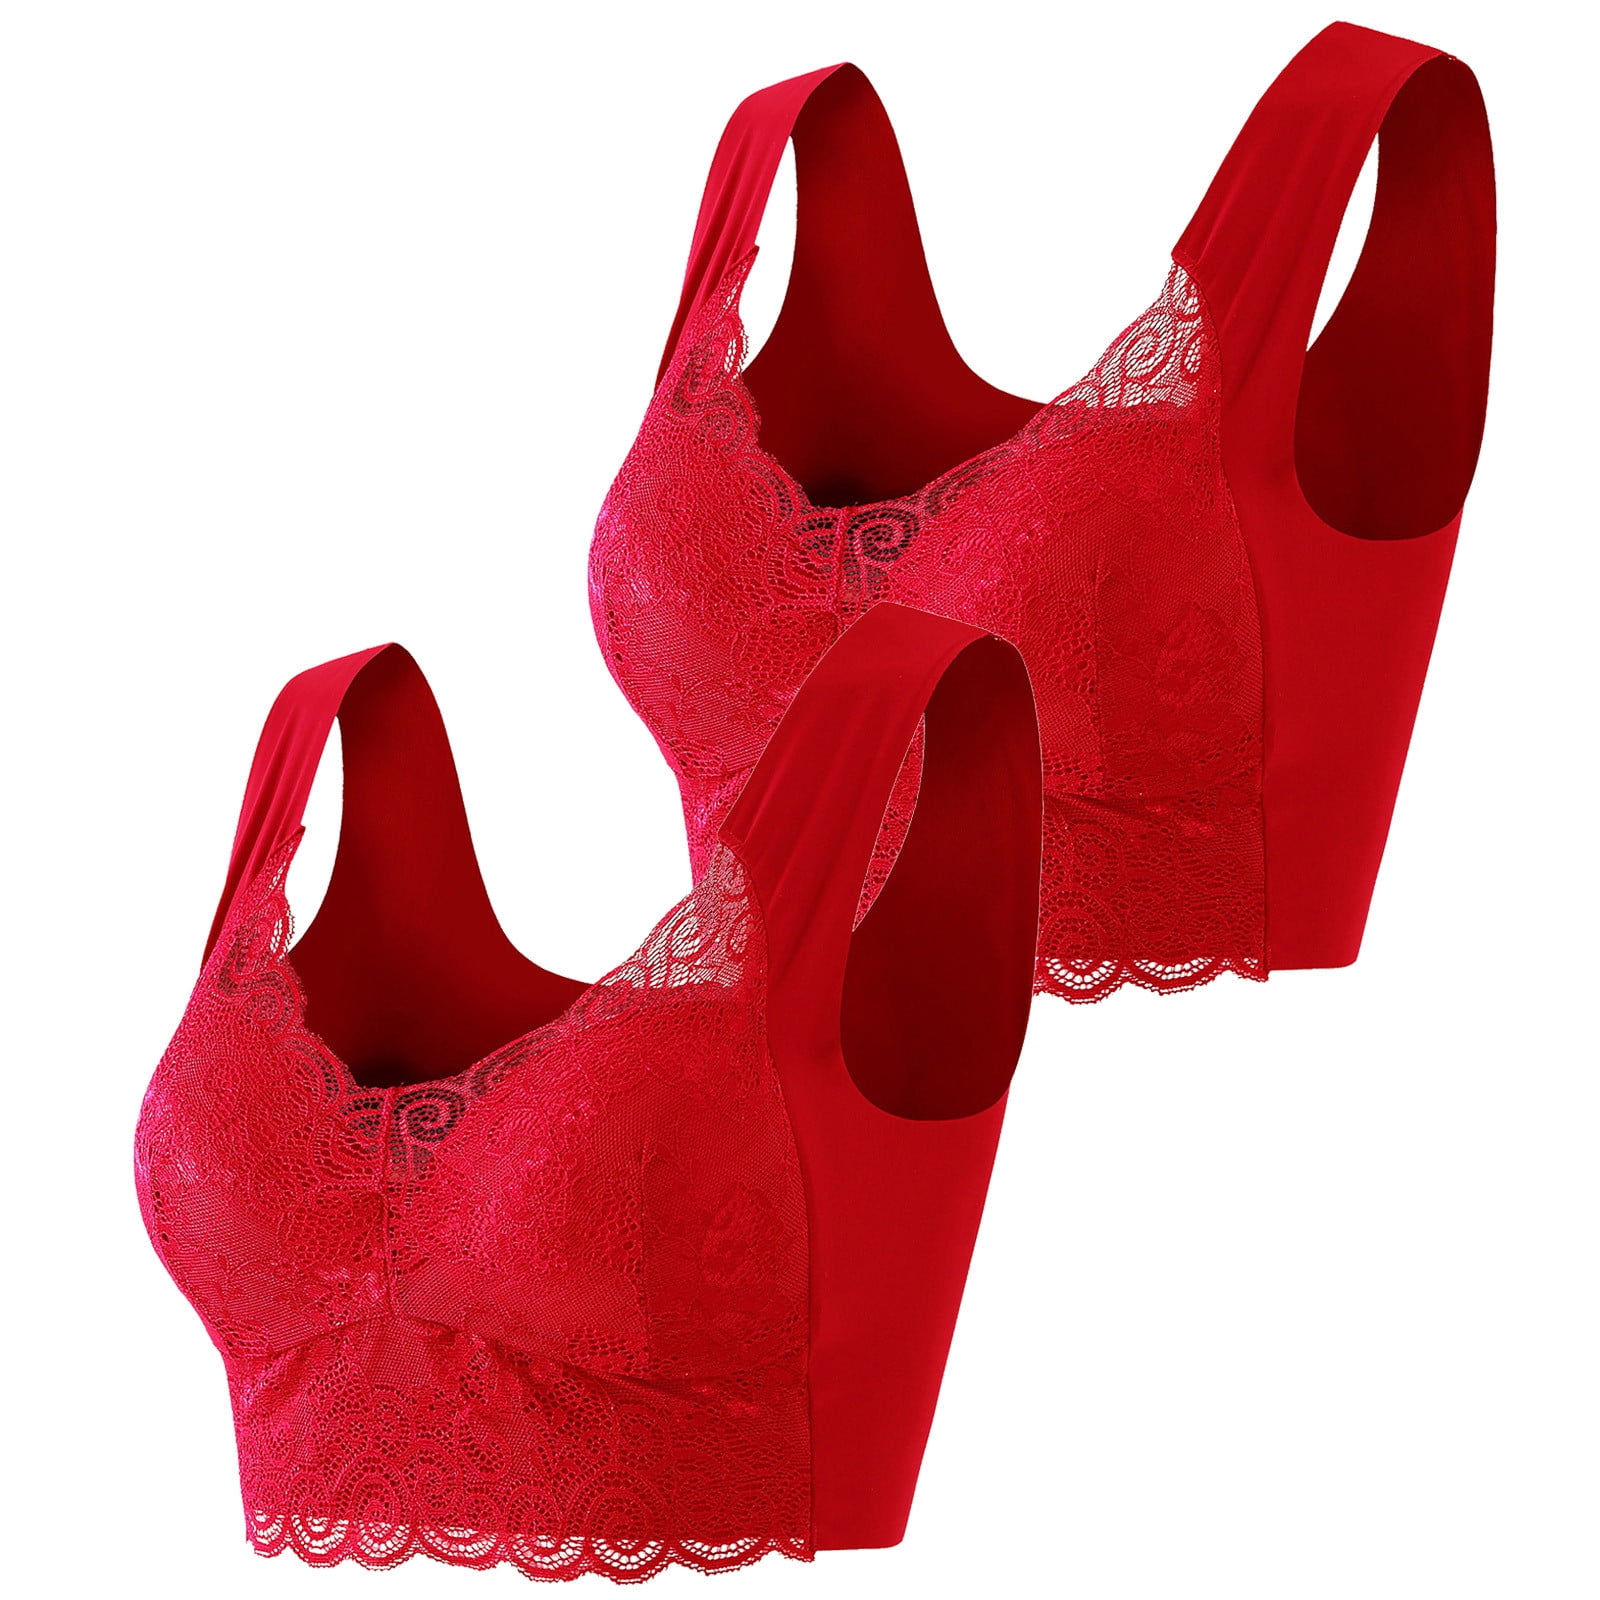 CLZOUD Full Support Bras for Women Red Nylon,Spandex 2 Pieces Lace